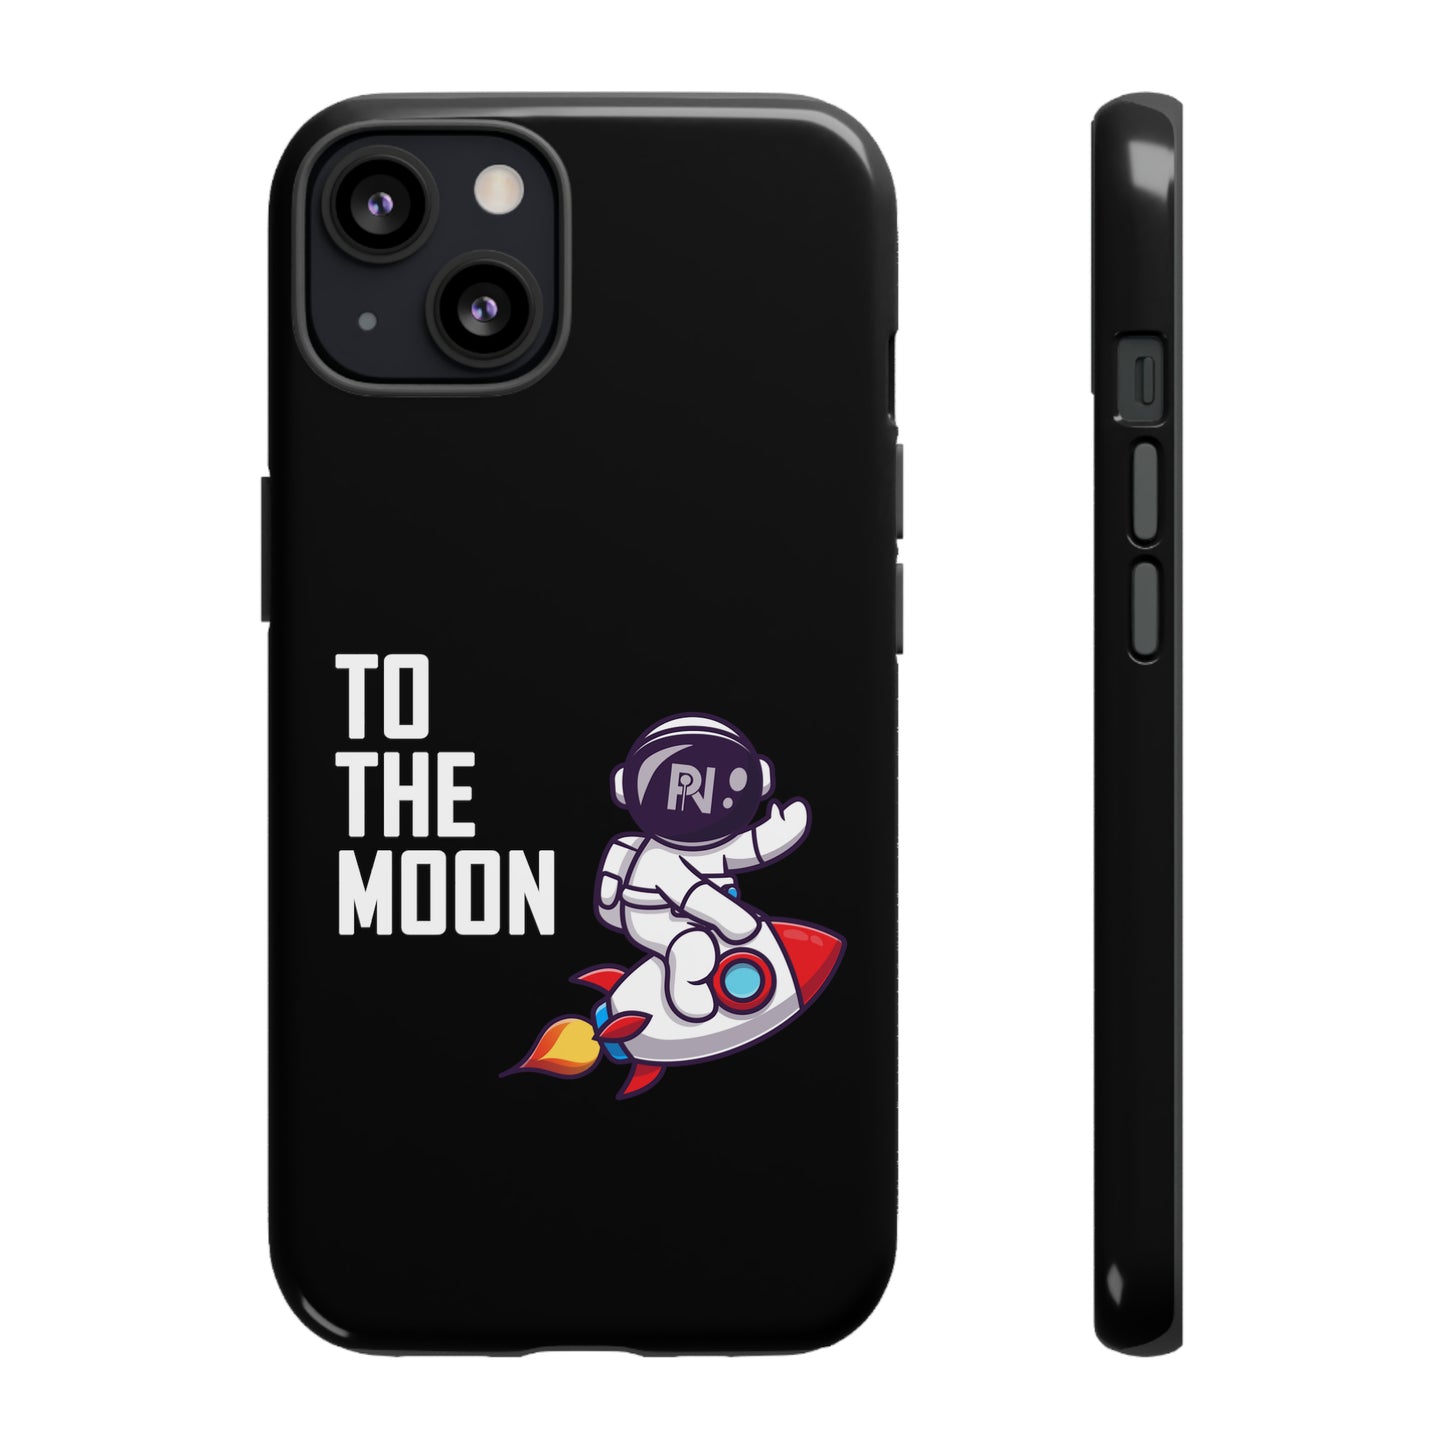 Universal Tough Case (To the moon)